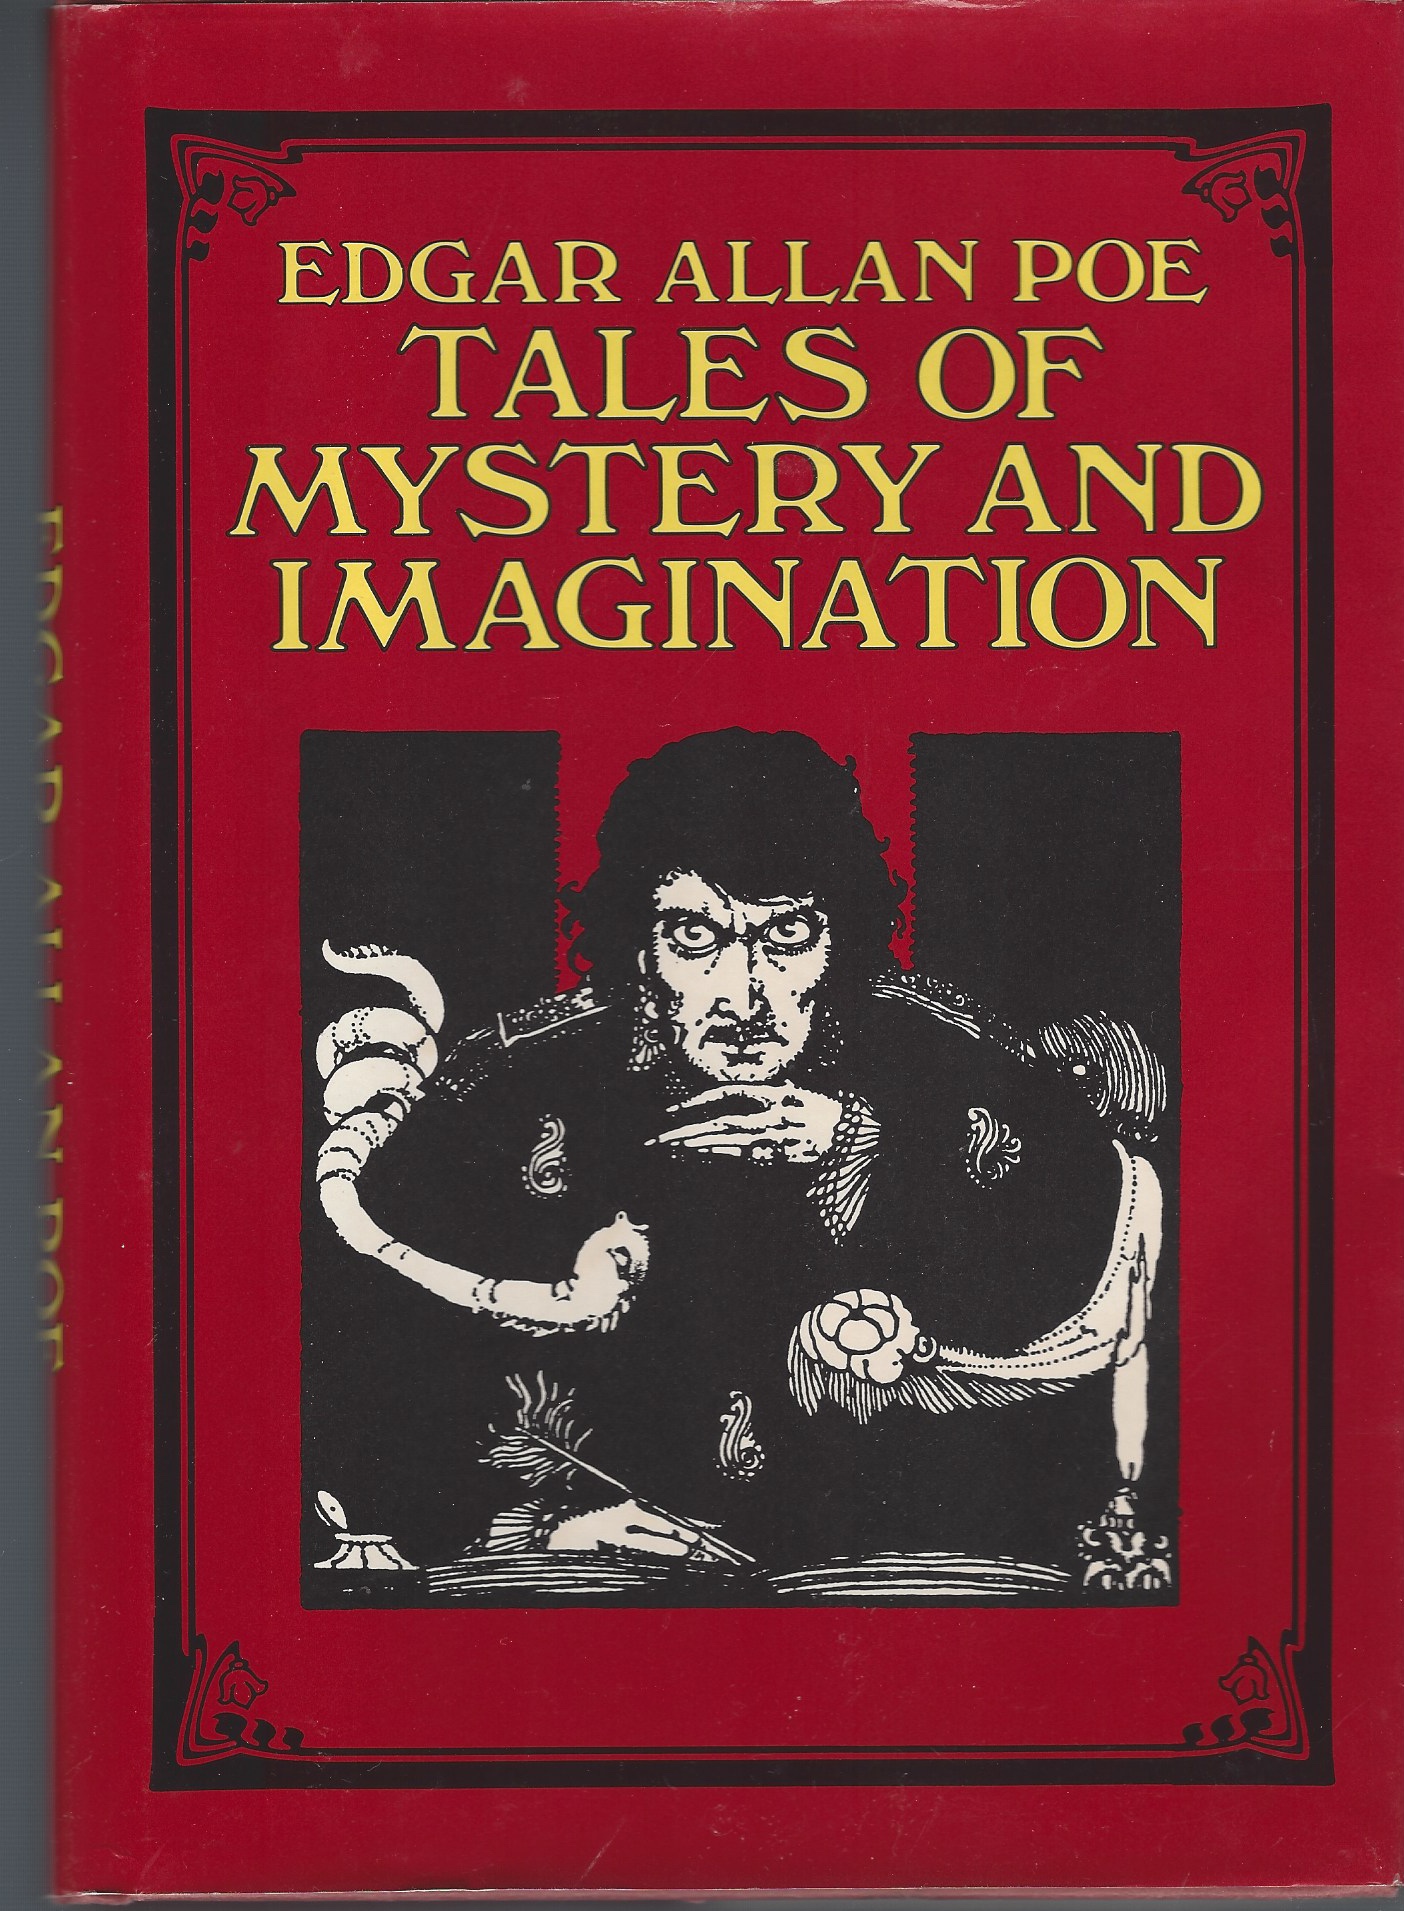 POE, EDGAR ALLAN - Tales of Mystery and Imagination